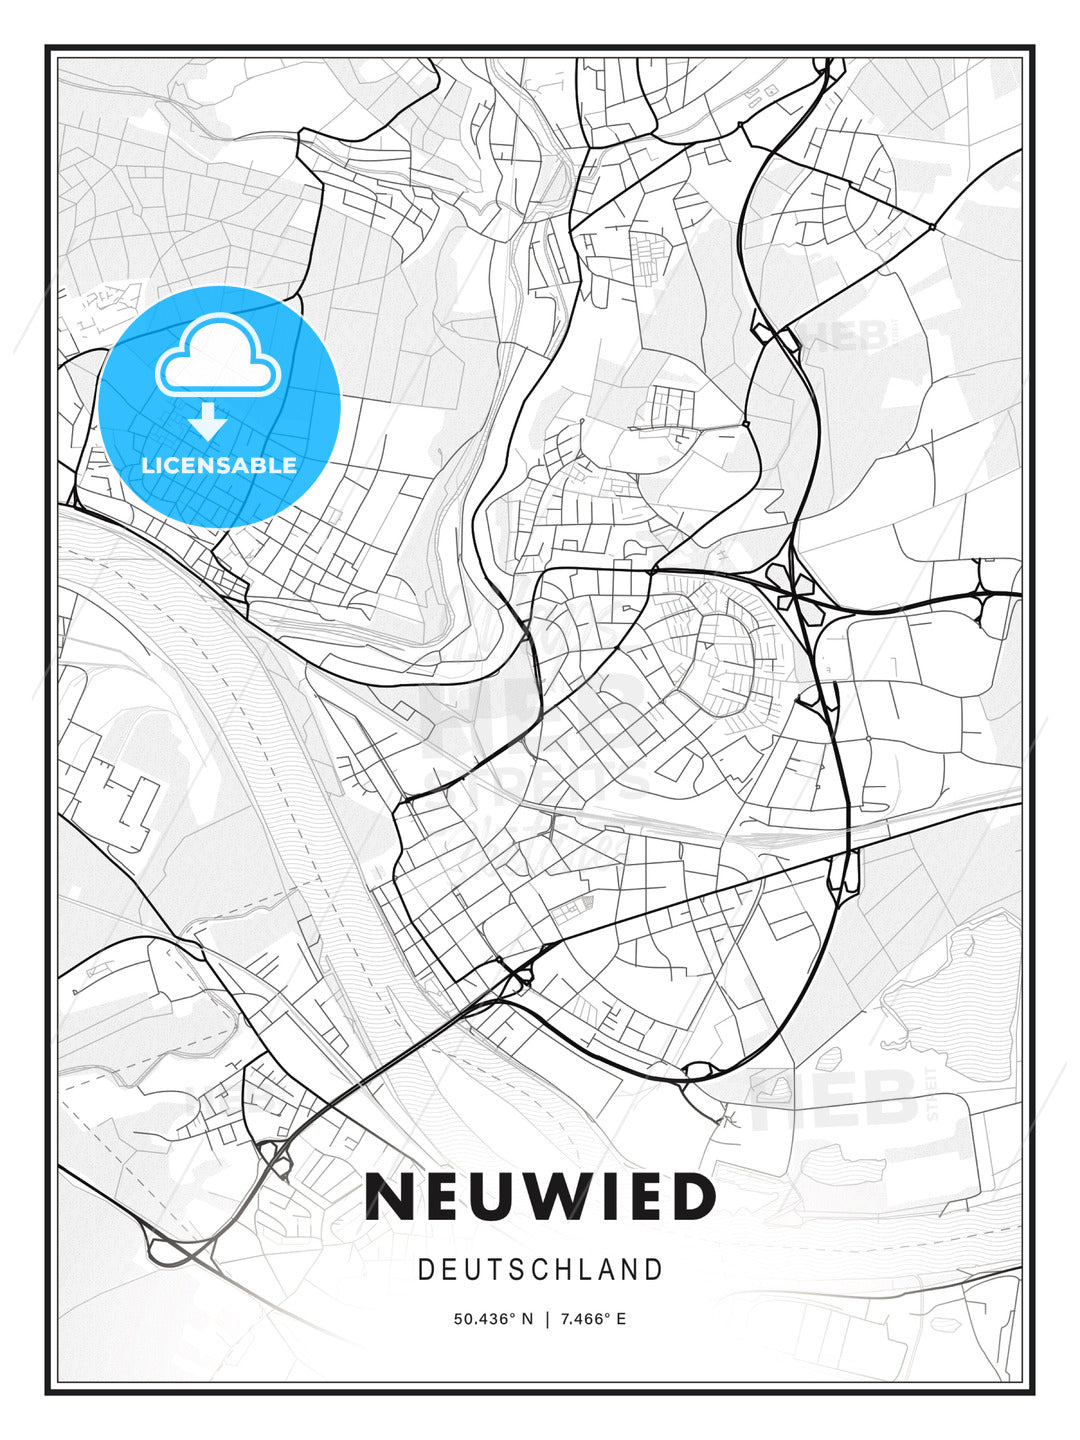 Neuwied, Germany, Modern Print Template in Various Formats - HEBSTREITS Sketches